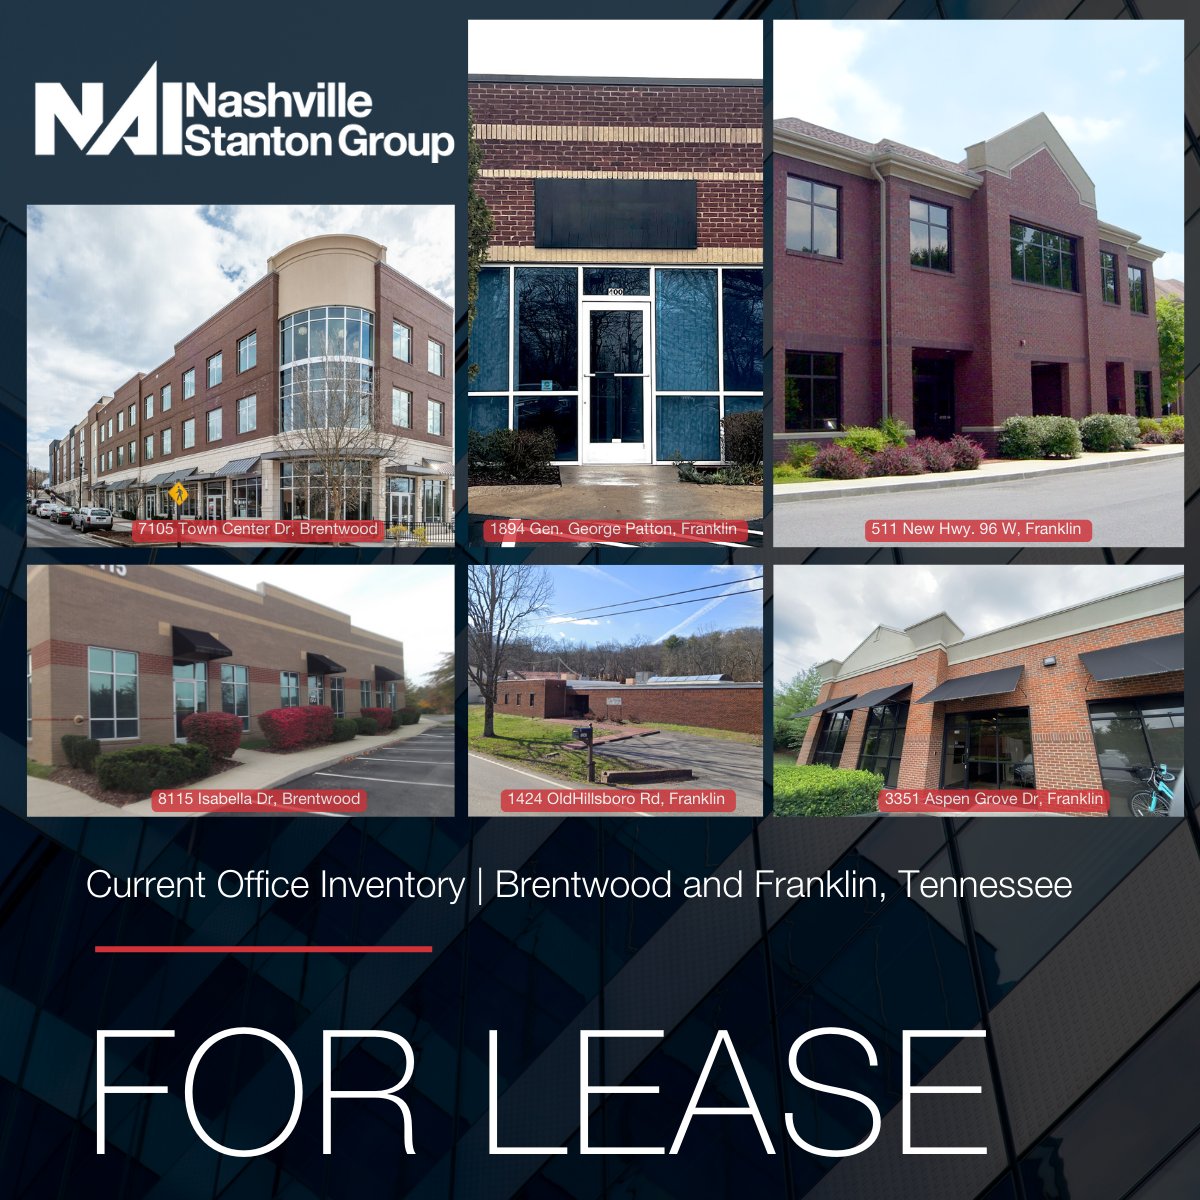 Seeking the perfect office space in Williamson County? Explore our website today for a comprehensive overview and reach out to us to discover more.

nainashville.com/properties/for…

#NAINSG #NAINashville #WilliamsonCounty #WilCo #officespace #forlease #NashvilleCRE